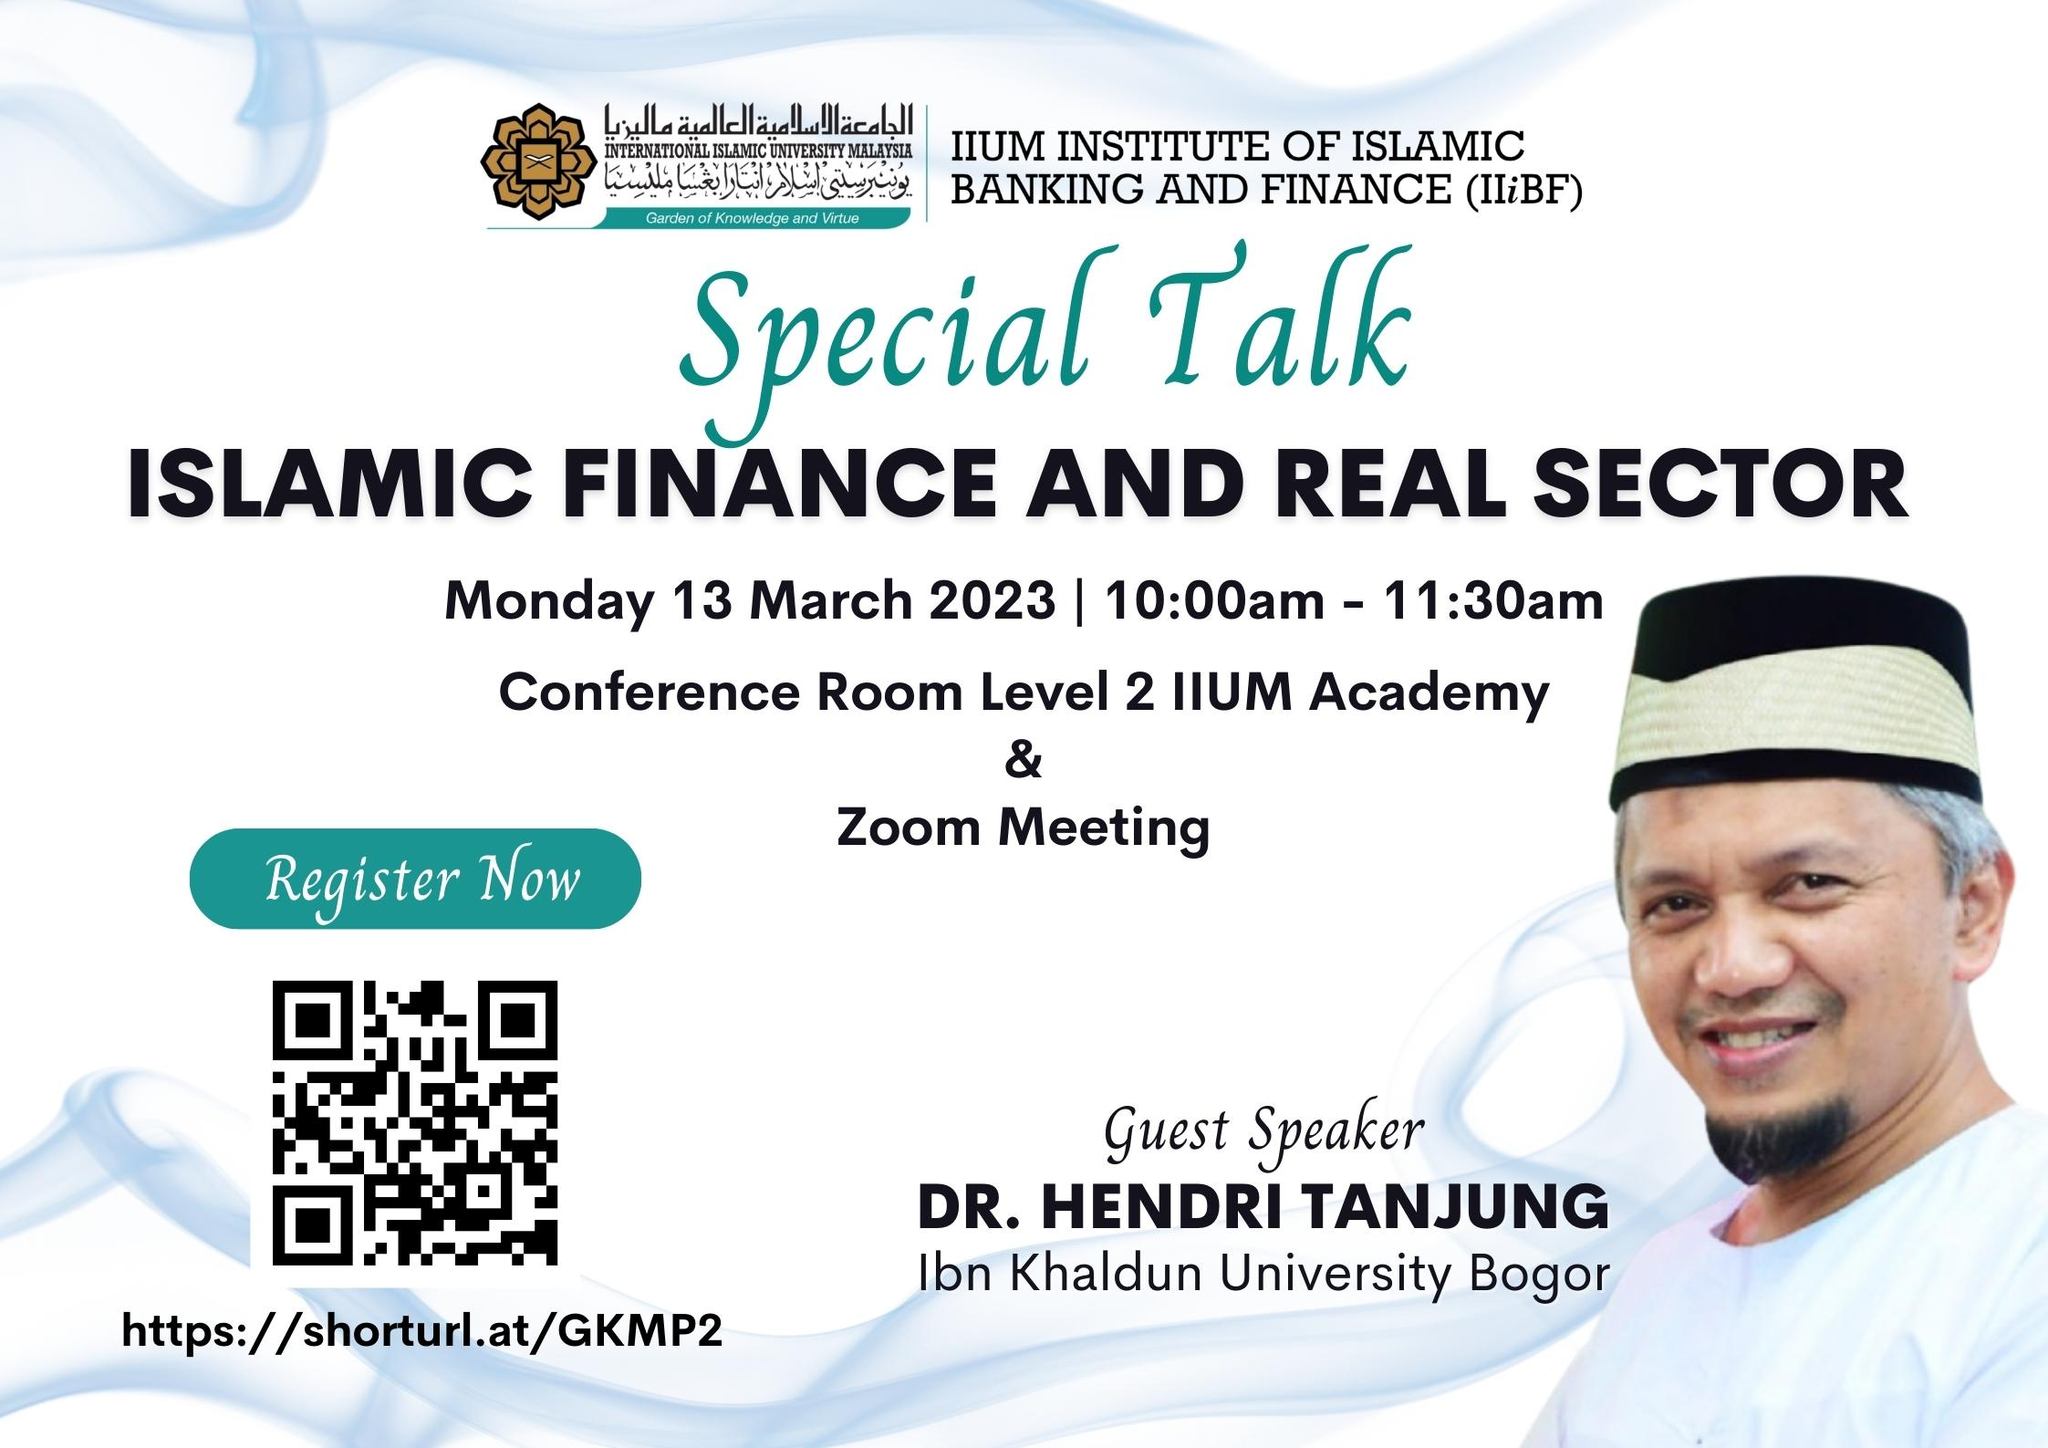 Special Talk on Islamic Finance and Real Sector : Monday, 13 March 2023